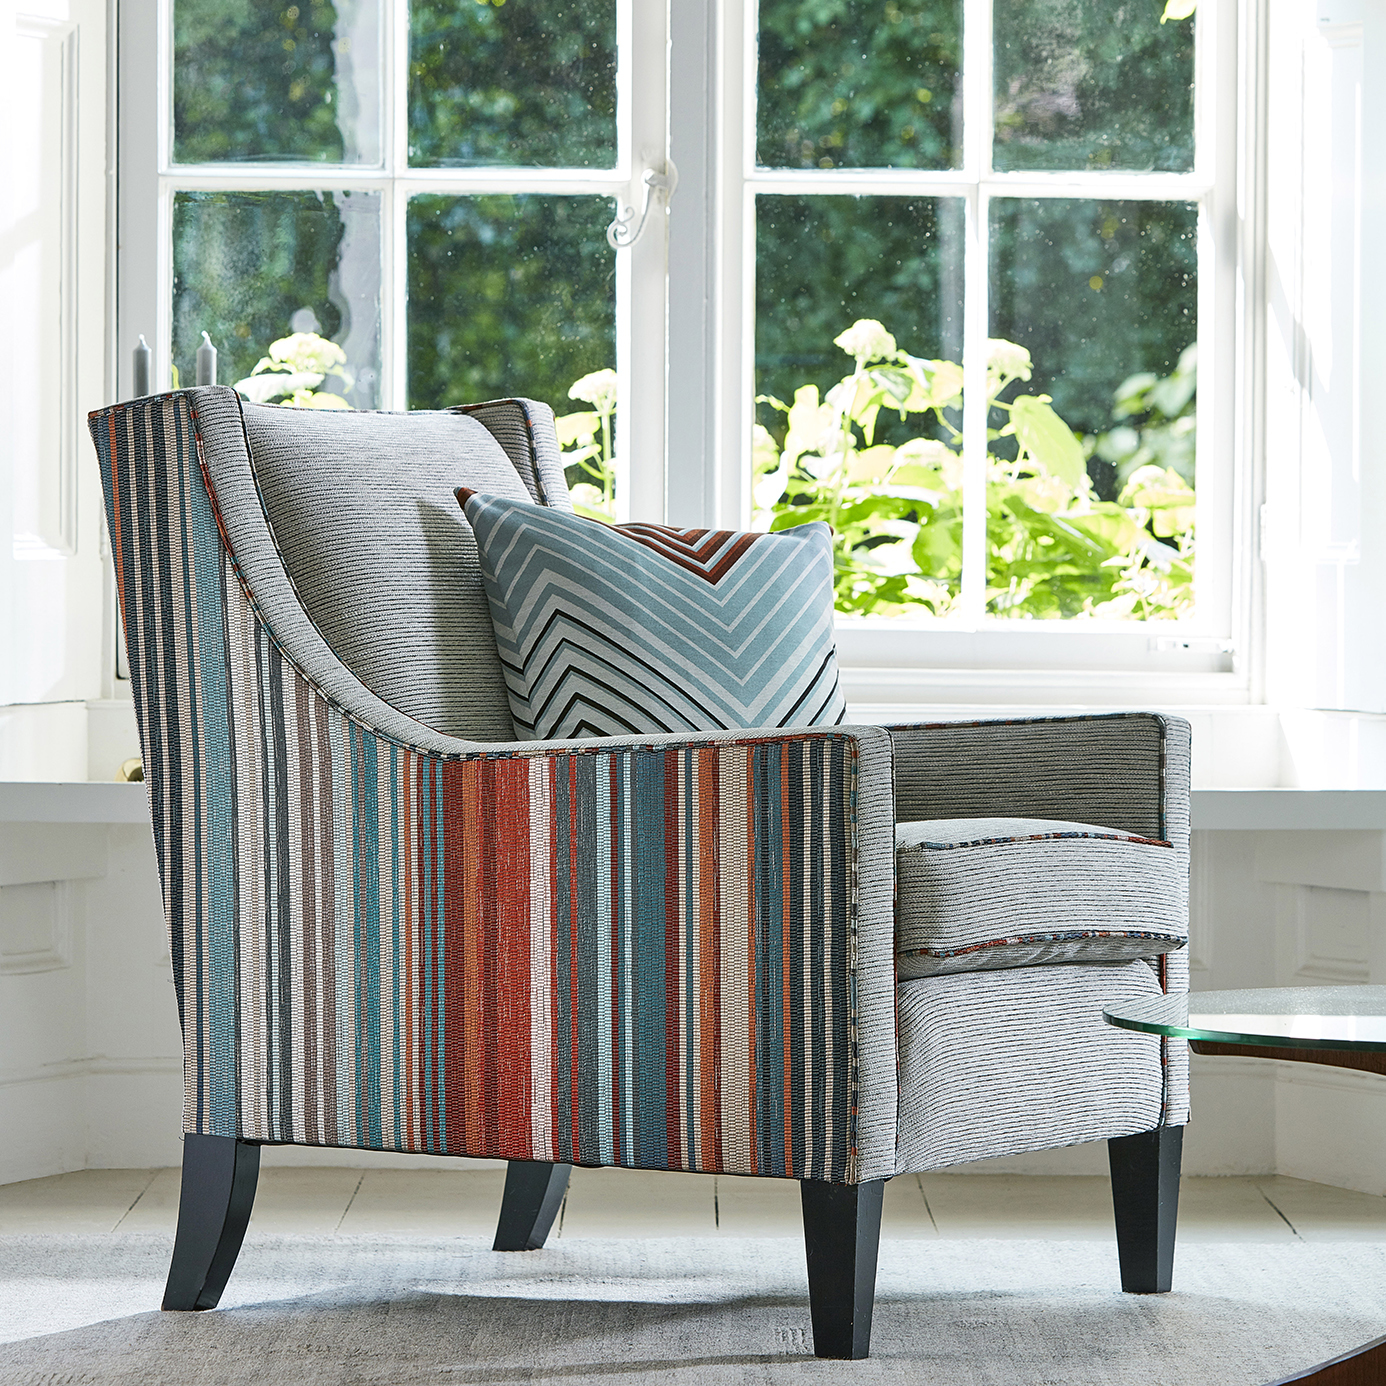 Spectro Stripe Teal/Sedonia/Rust Fabric by HAR